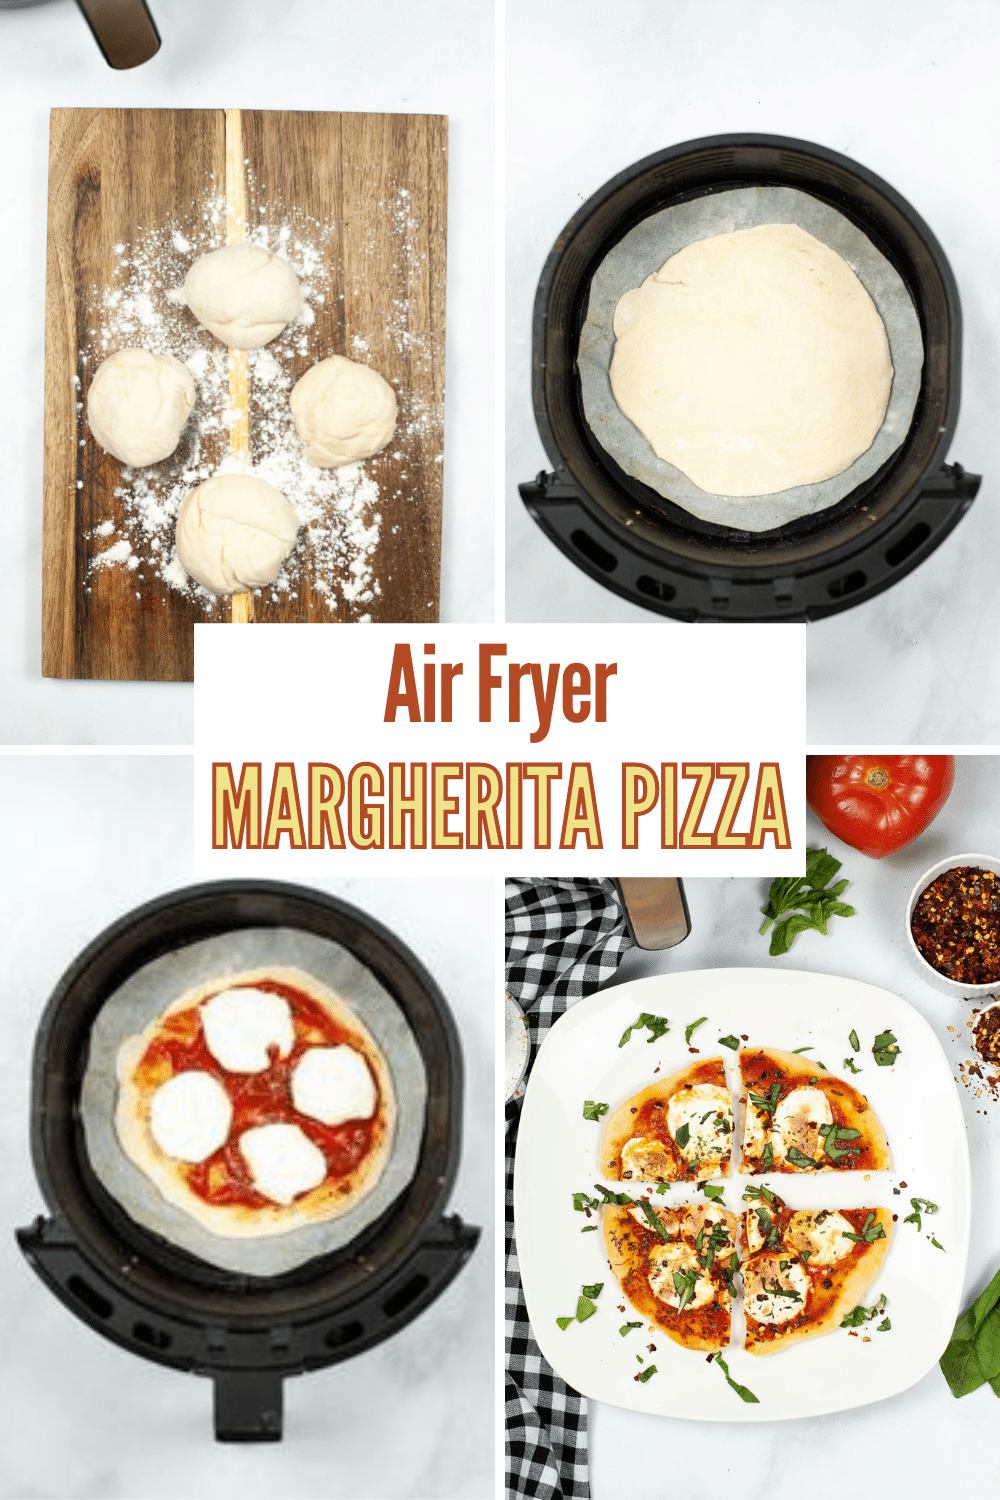 Air Fryer Margherita Pizza is the best way to have pizza without all the hassle! This air-fried pizza is going to be a family favorite. #airfryer #margheritapizza #pizza #recipe via @wondermomwannab